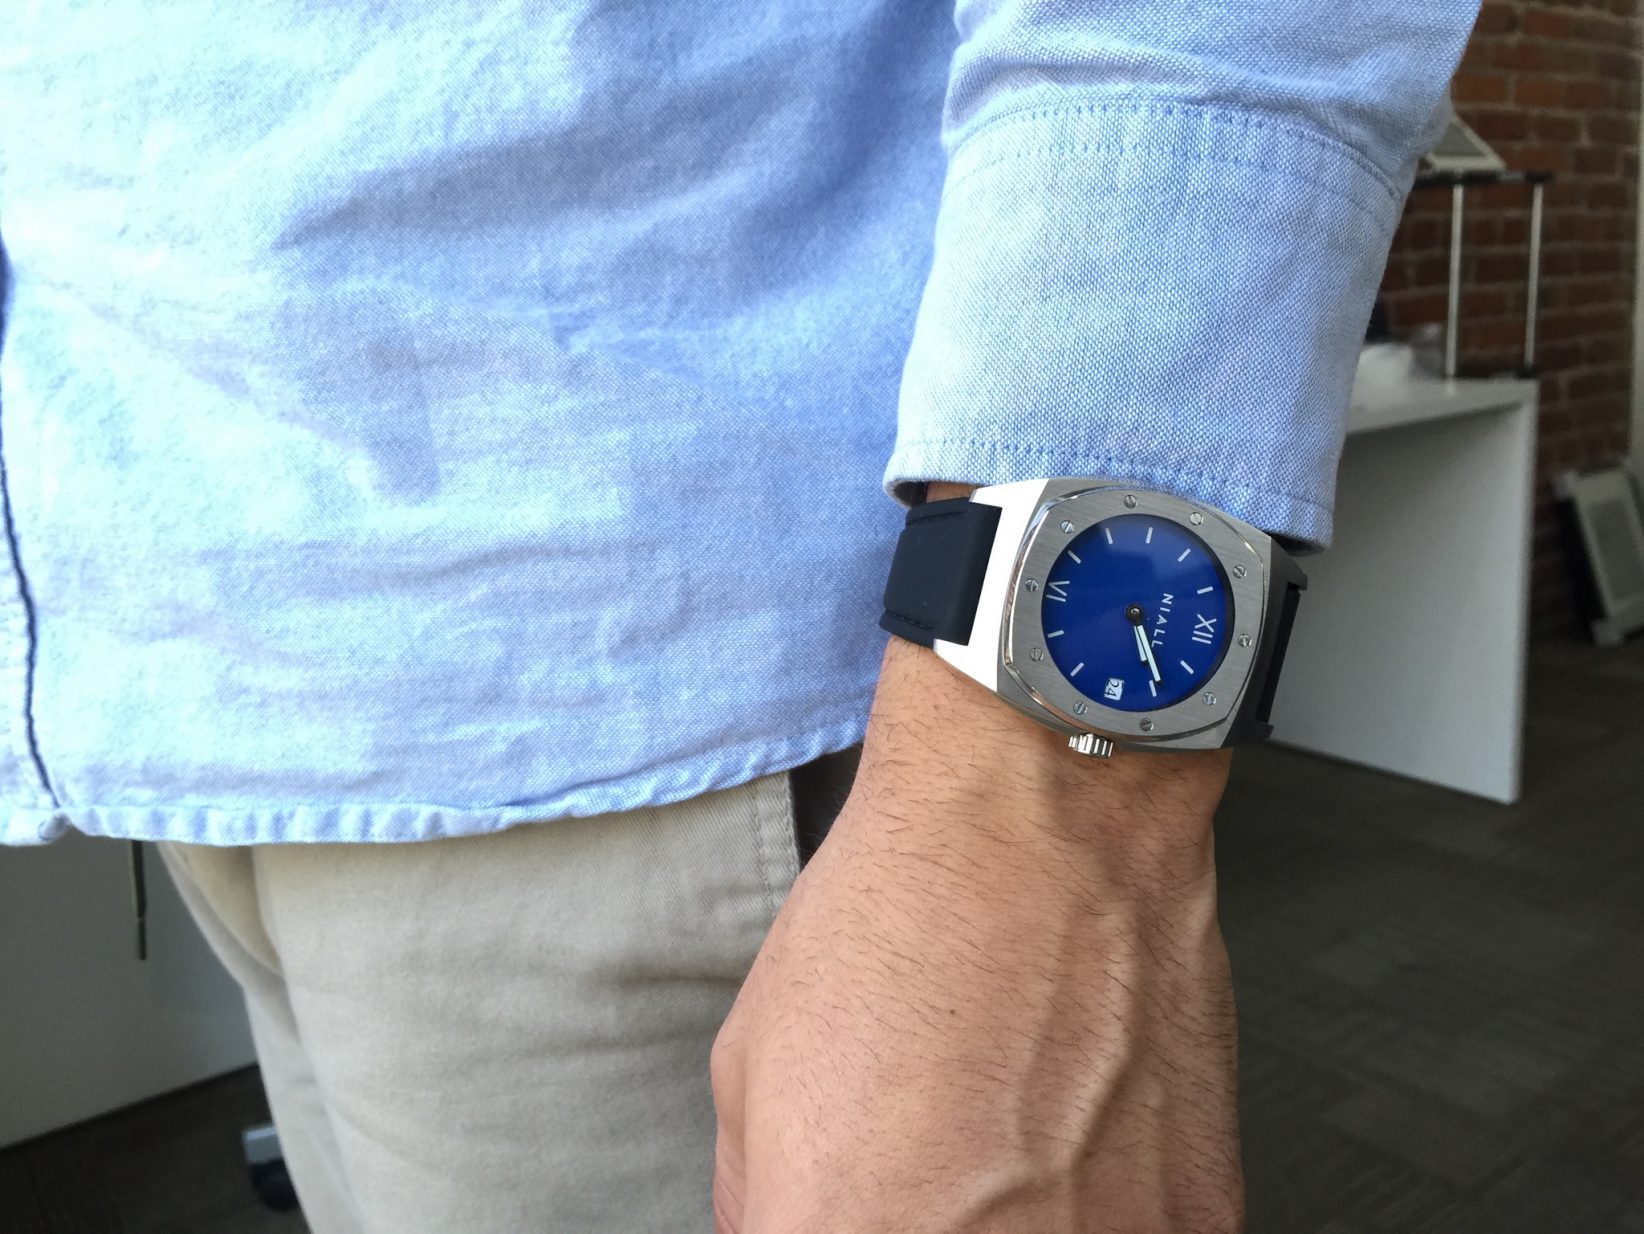 After Apple Watch snafu, Niall gifts Royals’ Yost a timepiece